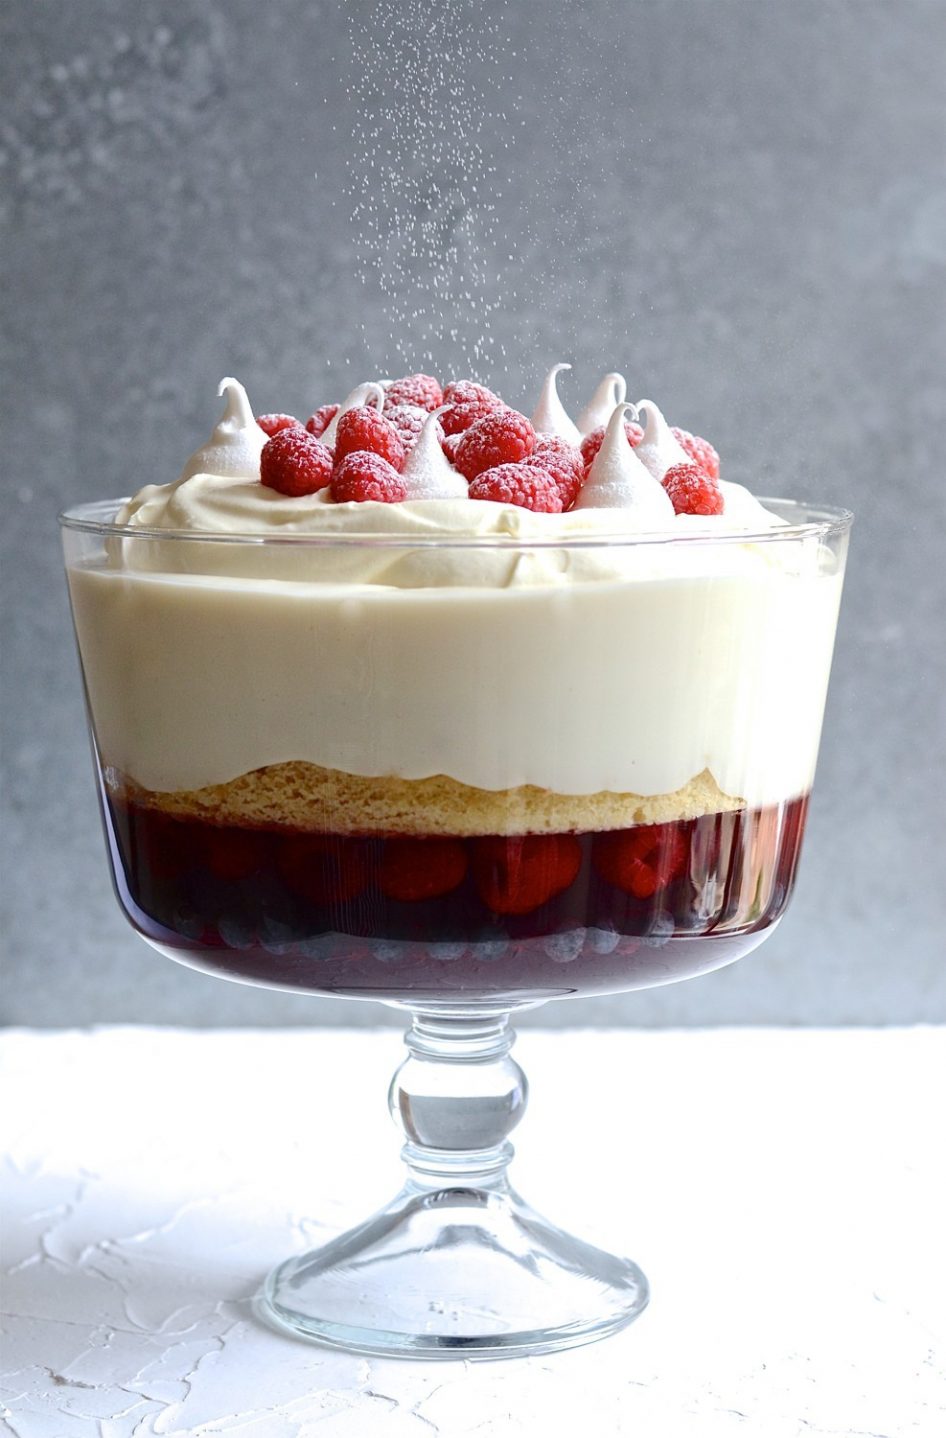 How to make a Showstopper trifle